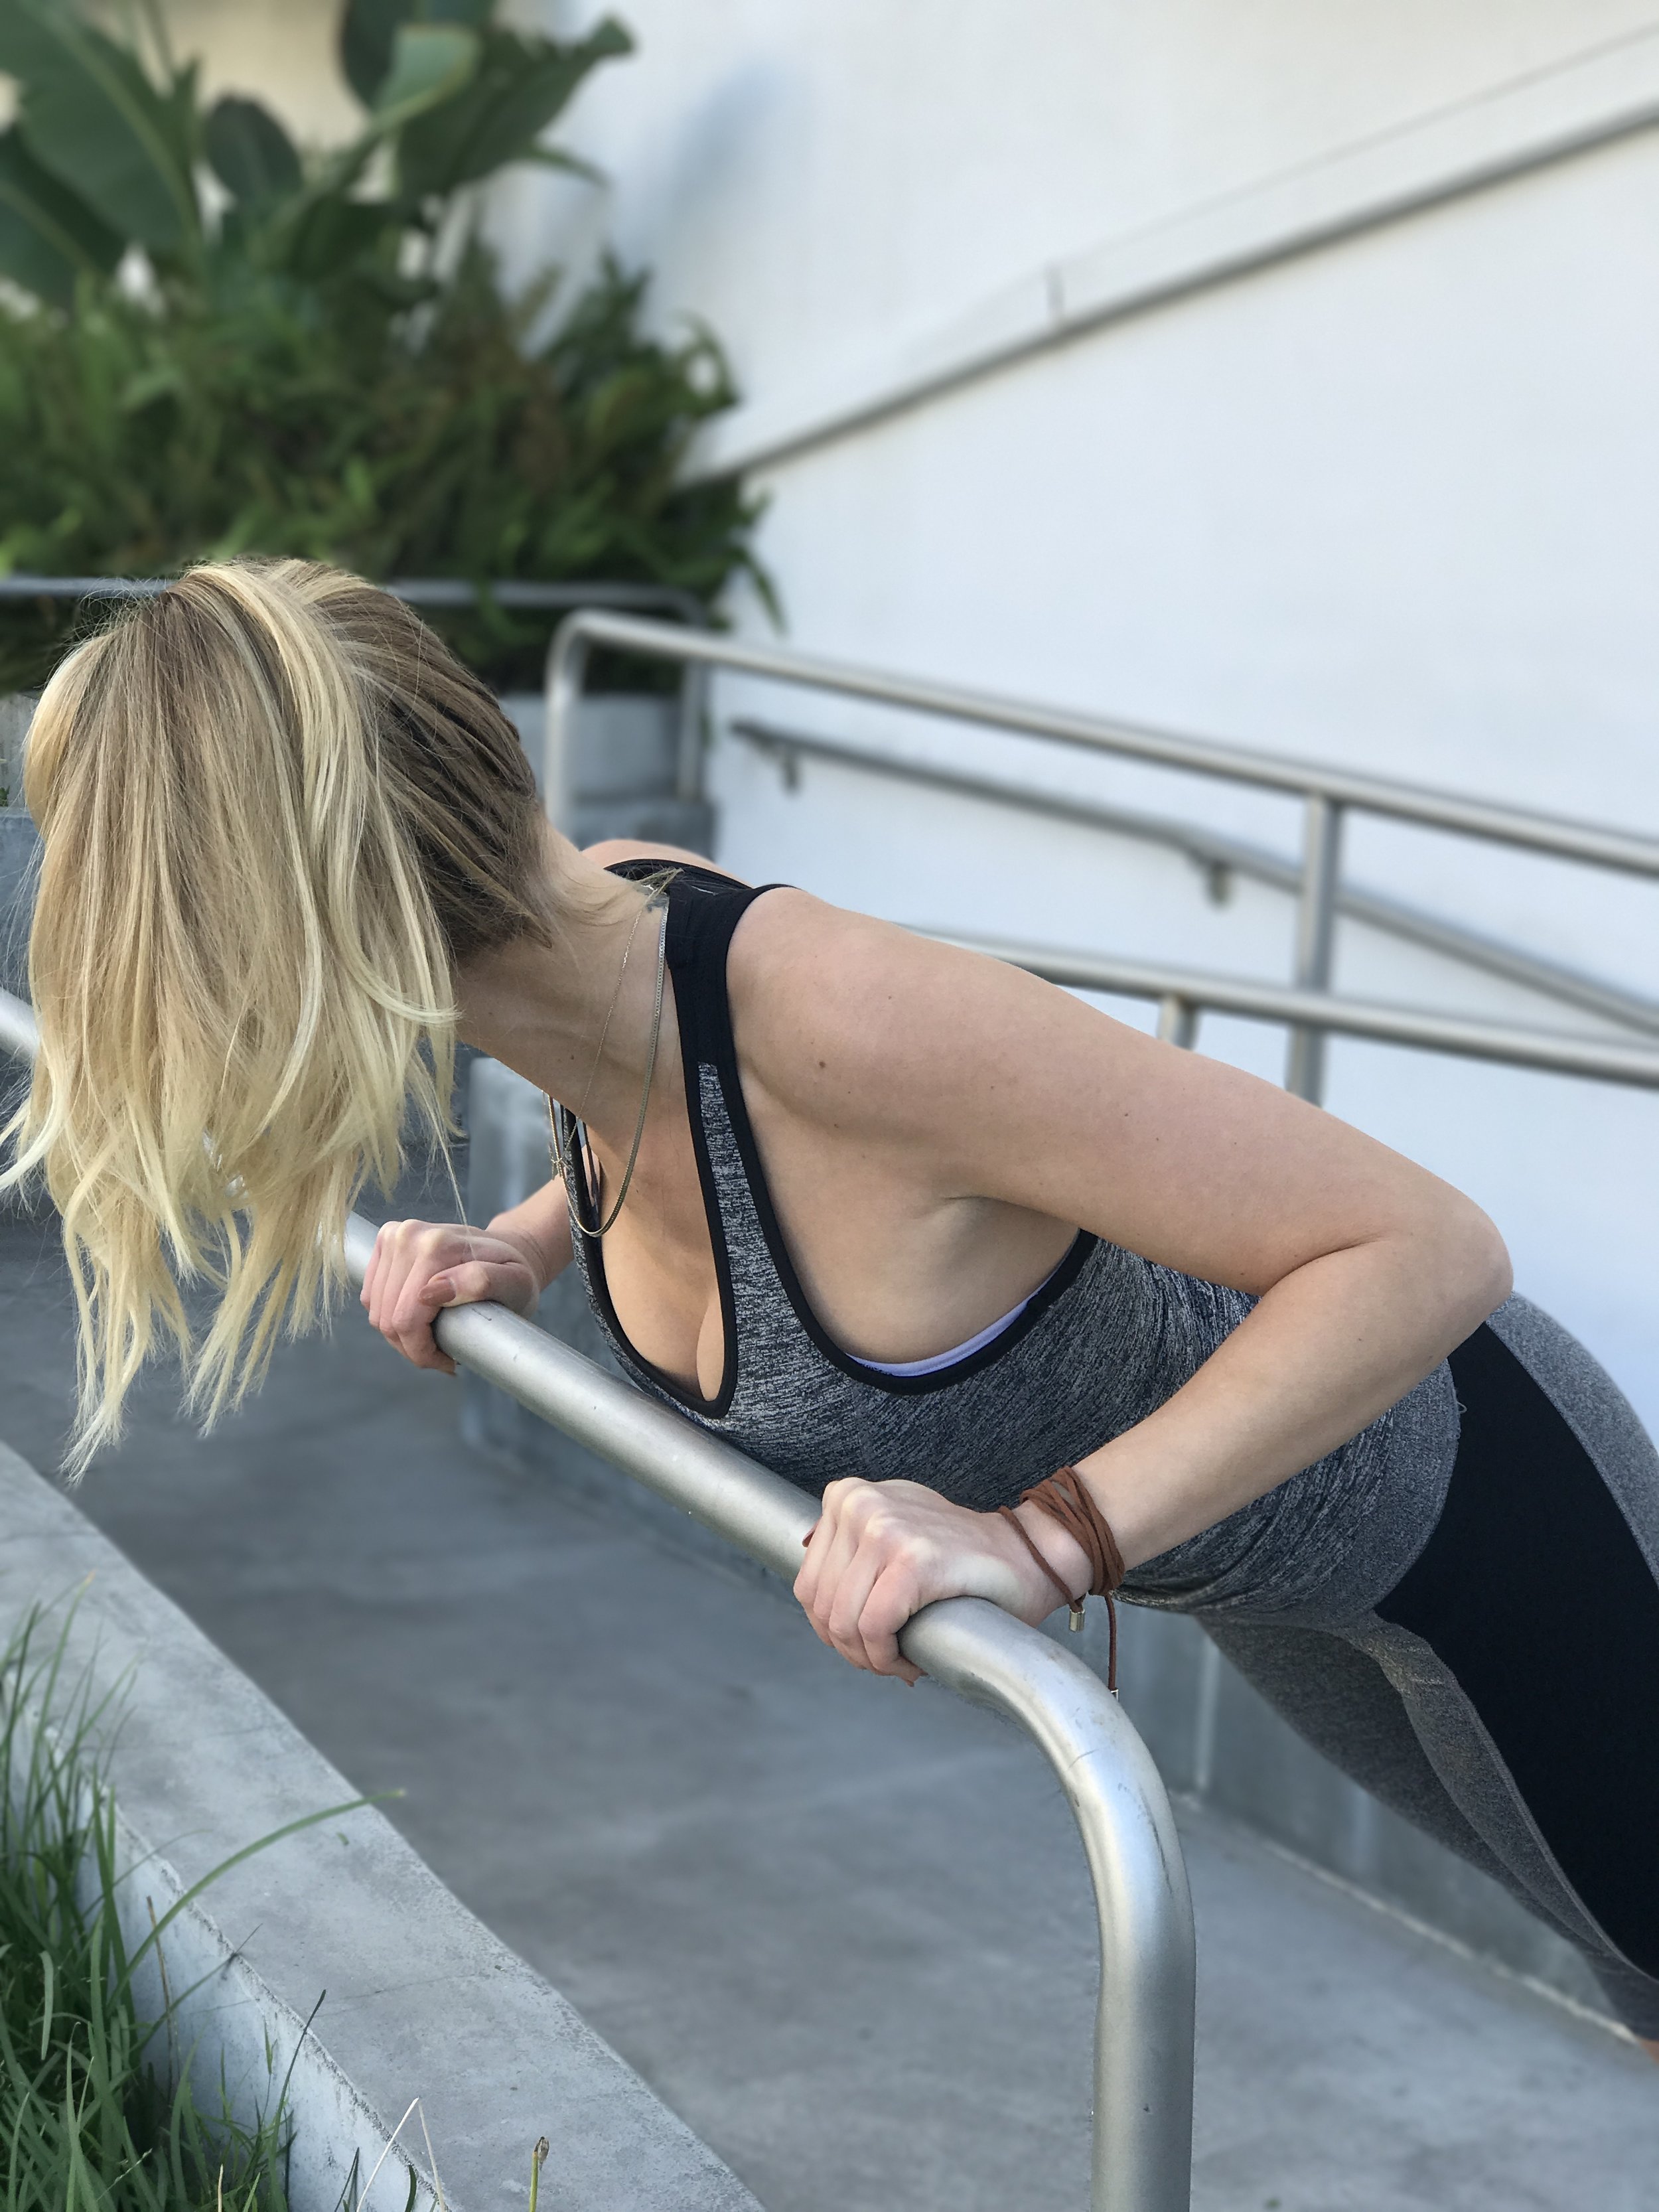 HOW TO GET TONED, SEXY ARMS — Chelsey Rose